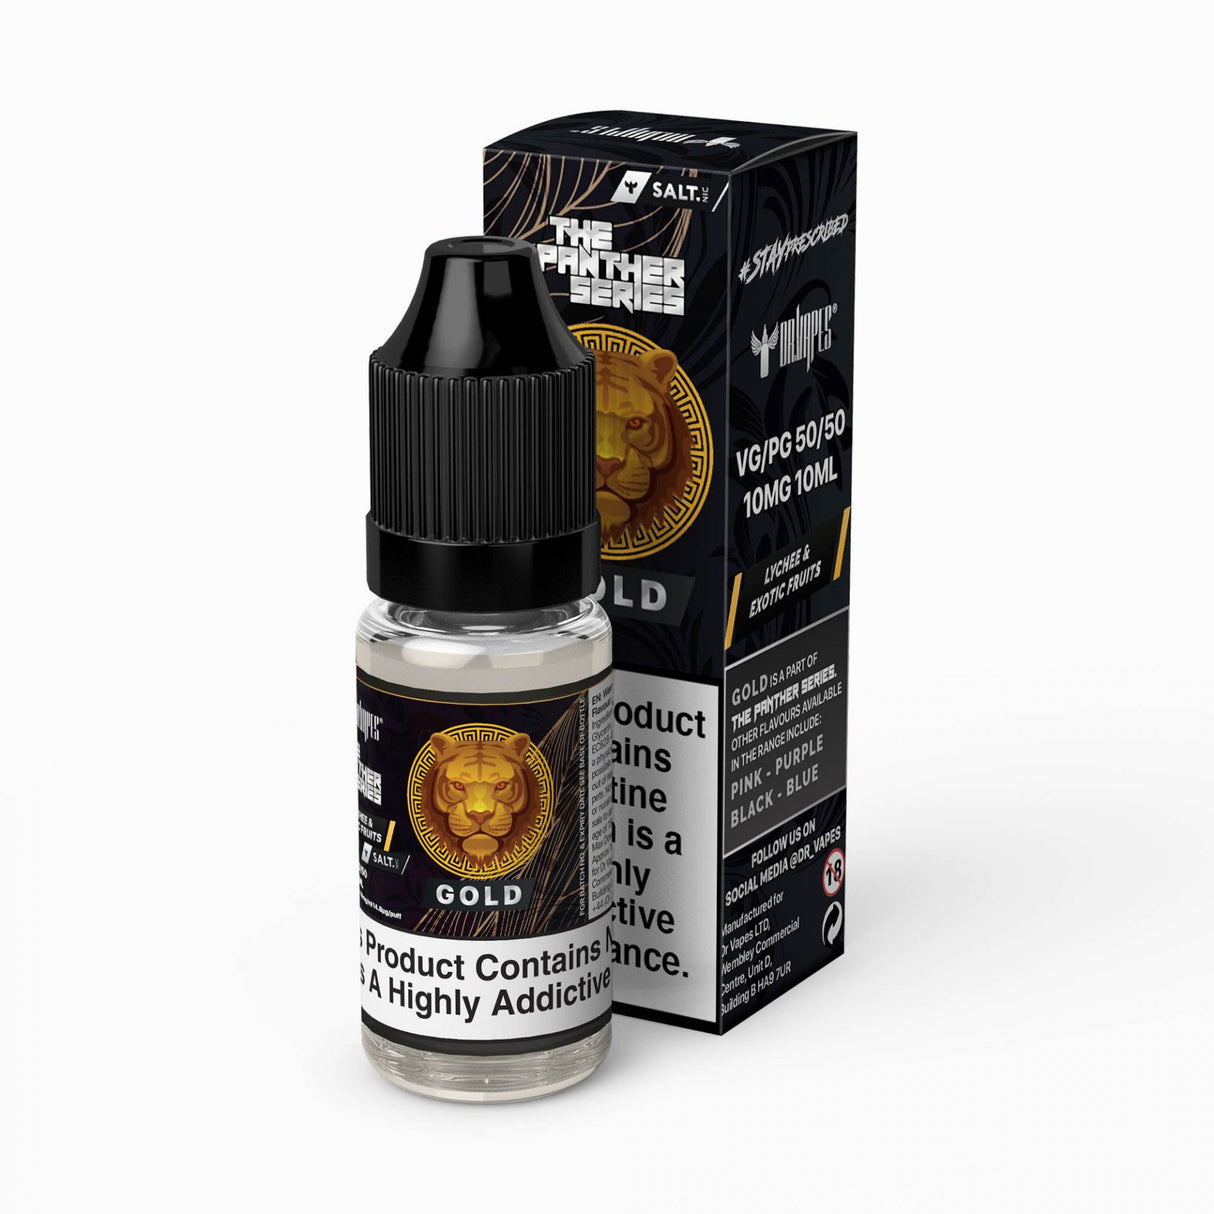 Gold Panther Nic Salt - The Panther Series Desserts by Dr Vape